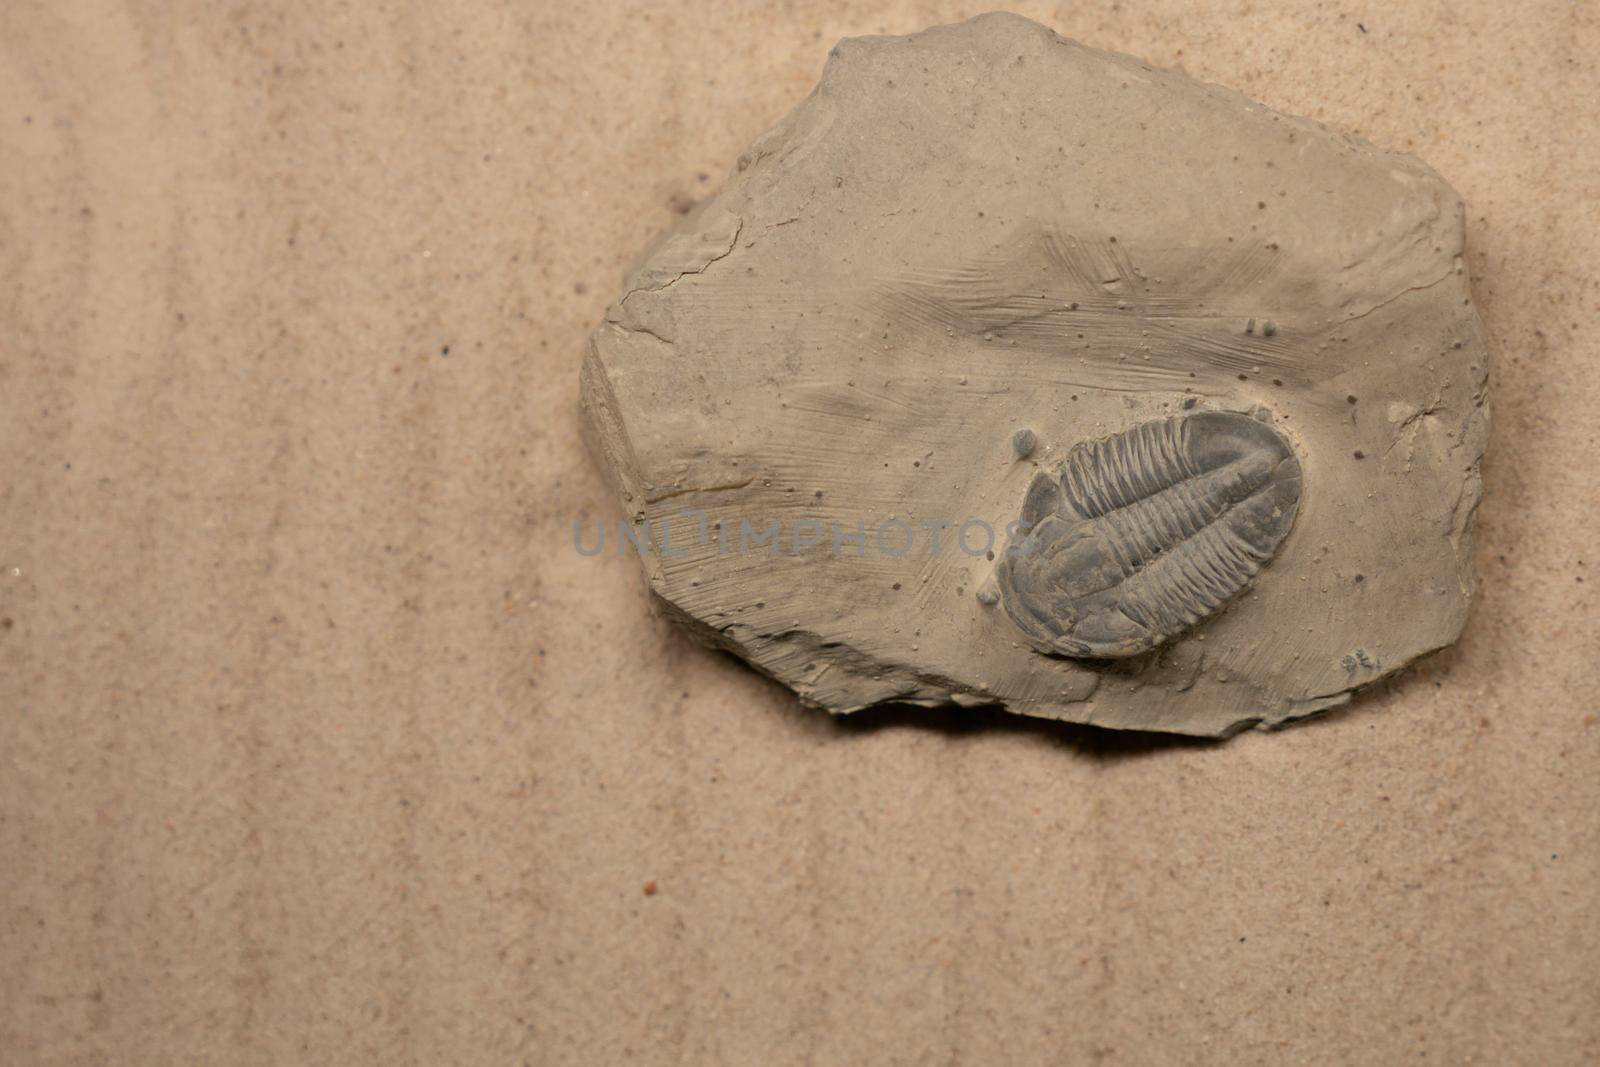 Asaphiscus Wheeleri is a genus of trilobite that lived in the Cambrian. Its remains have been found in Australia and North America, especially in Utah. by sirawit99